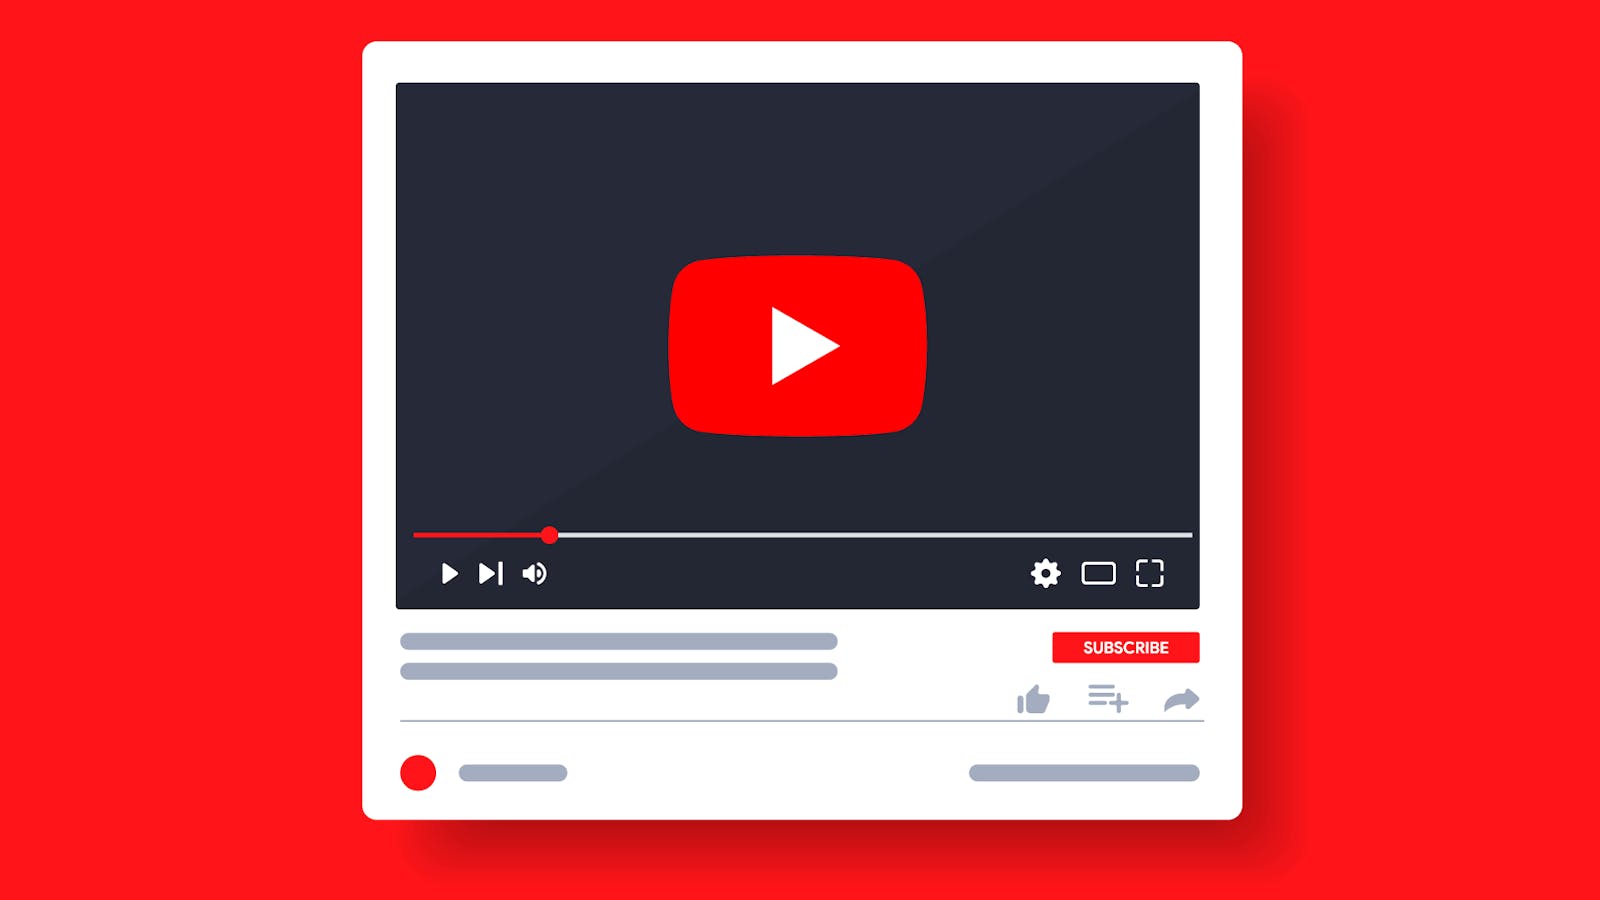 YouTube launched an audio feature for creators to dub their videos. Photo: Shutterstock